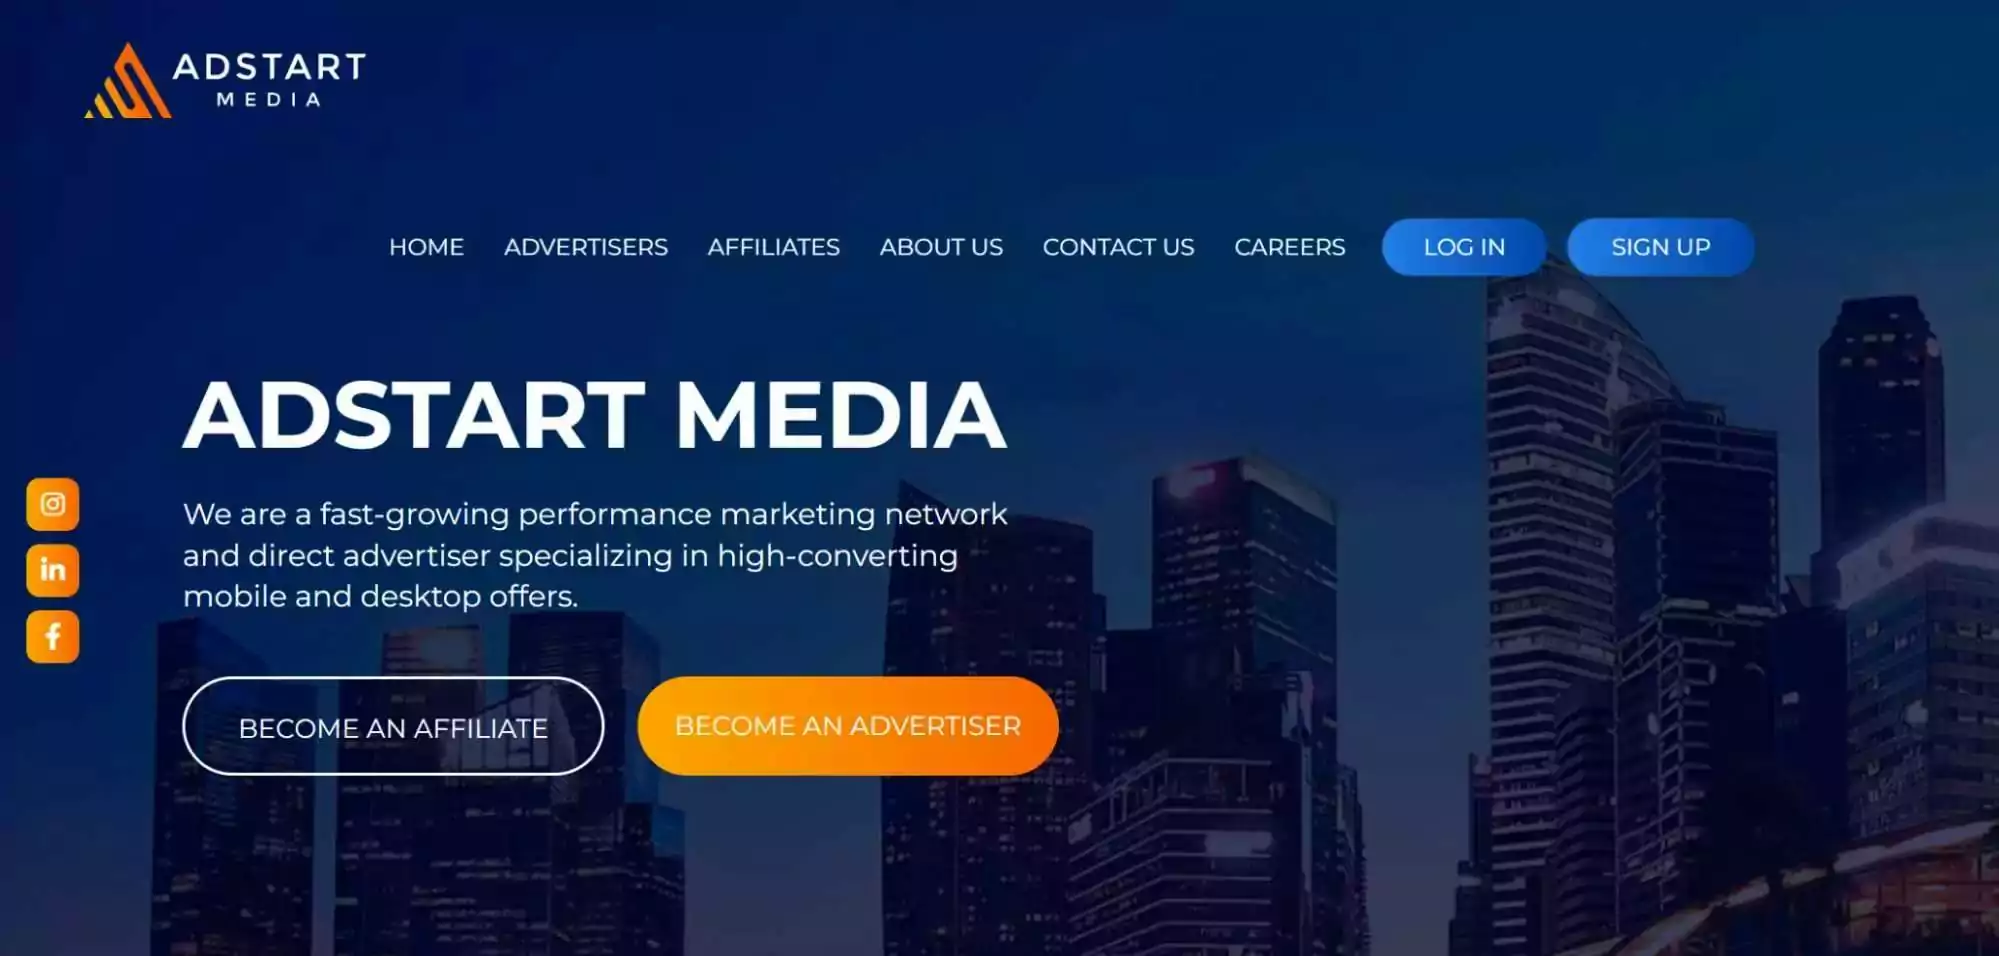 adstart-home-page